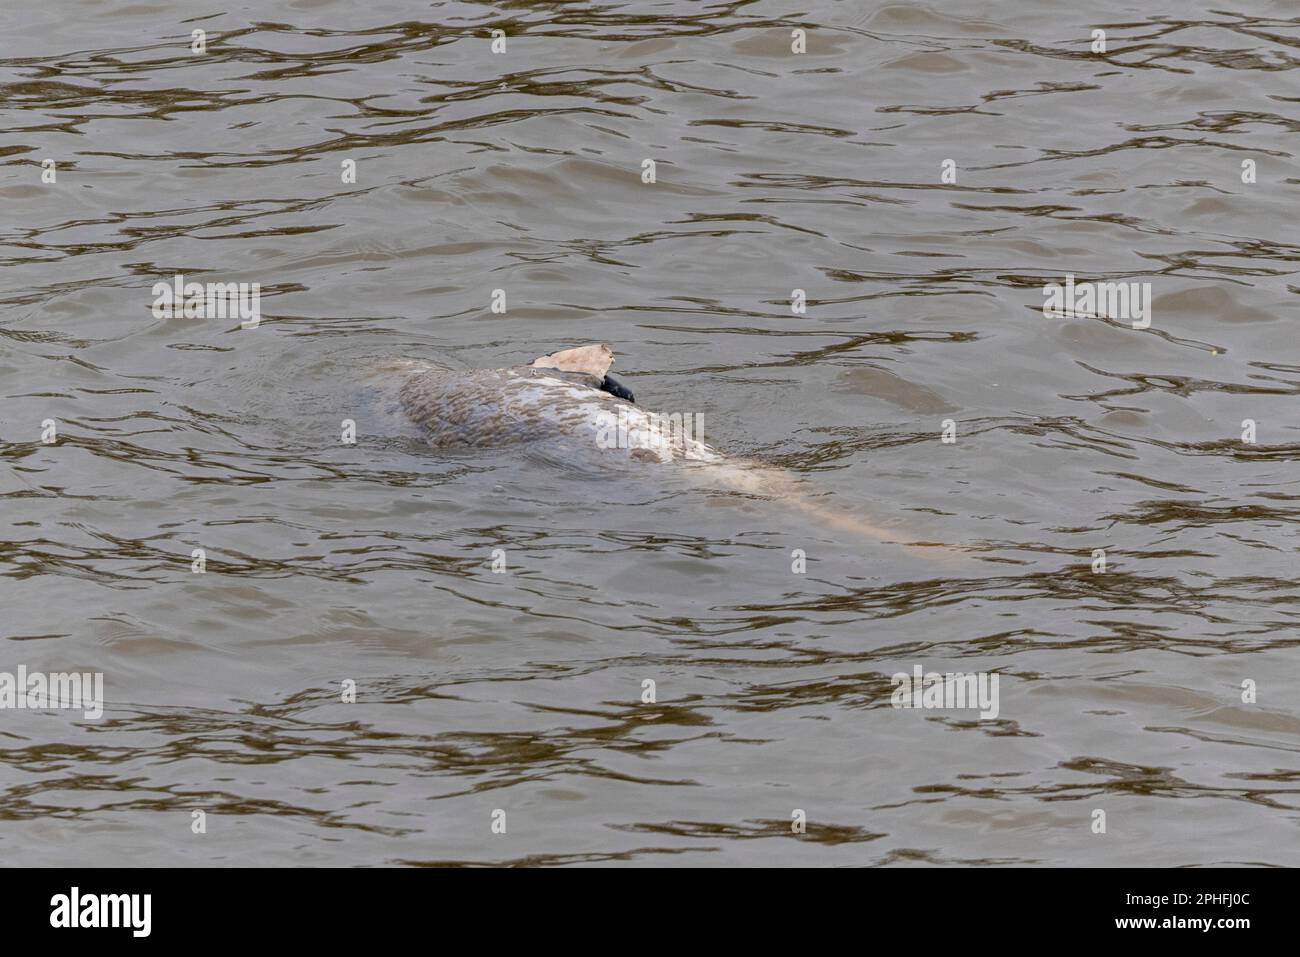 Dead seal floating in the River Thames at Chiswick, London, UK Stock Photo